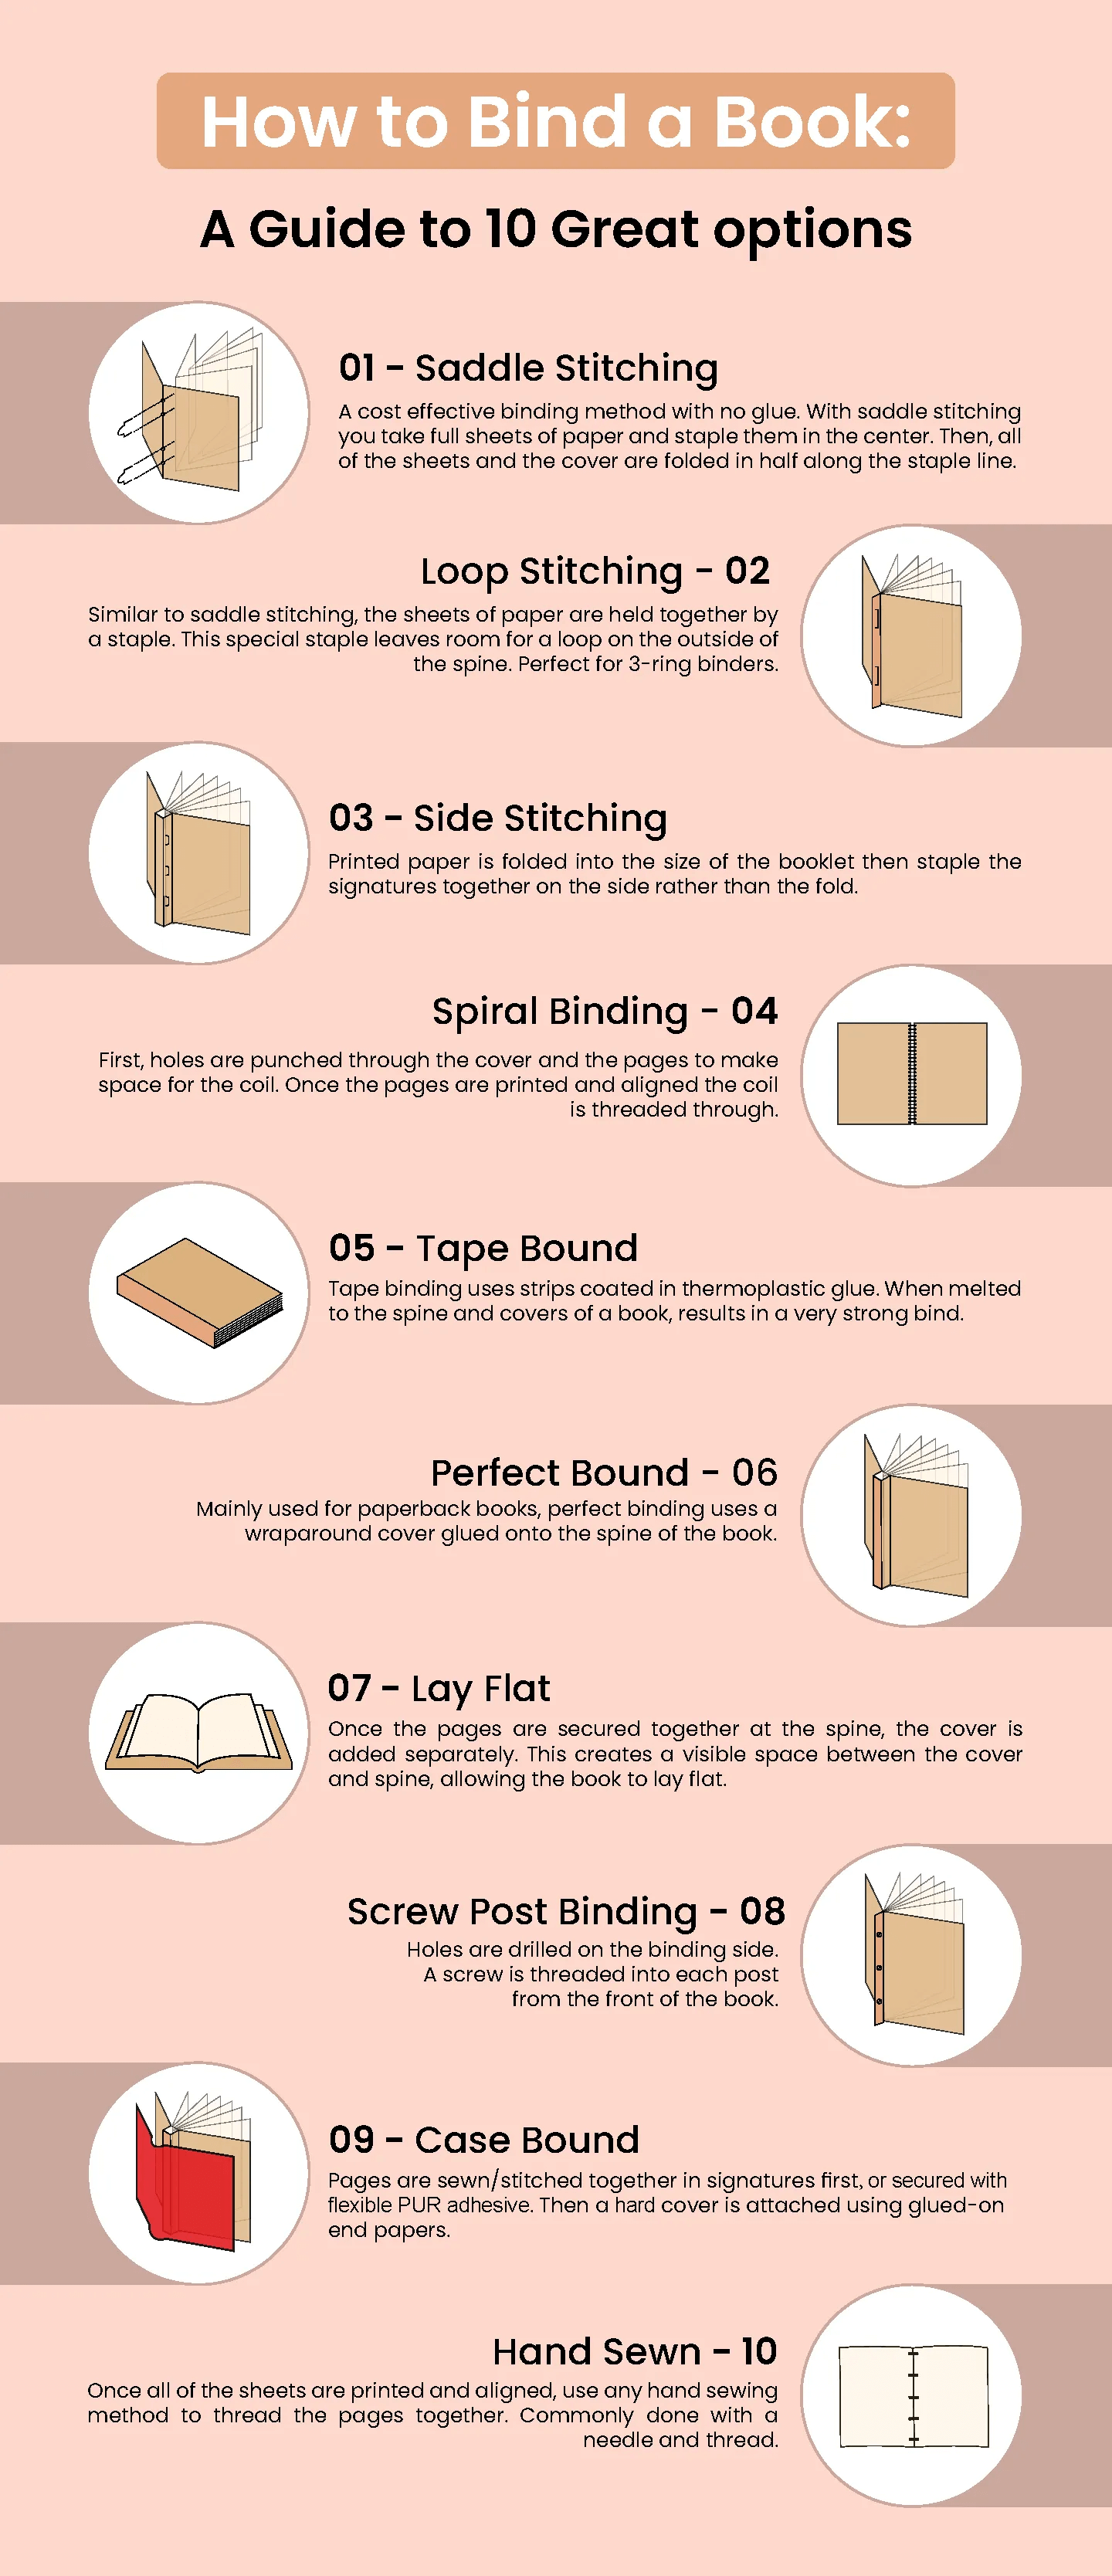 How to Bind a Book 10 Great Options